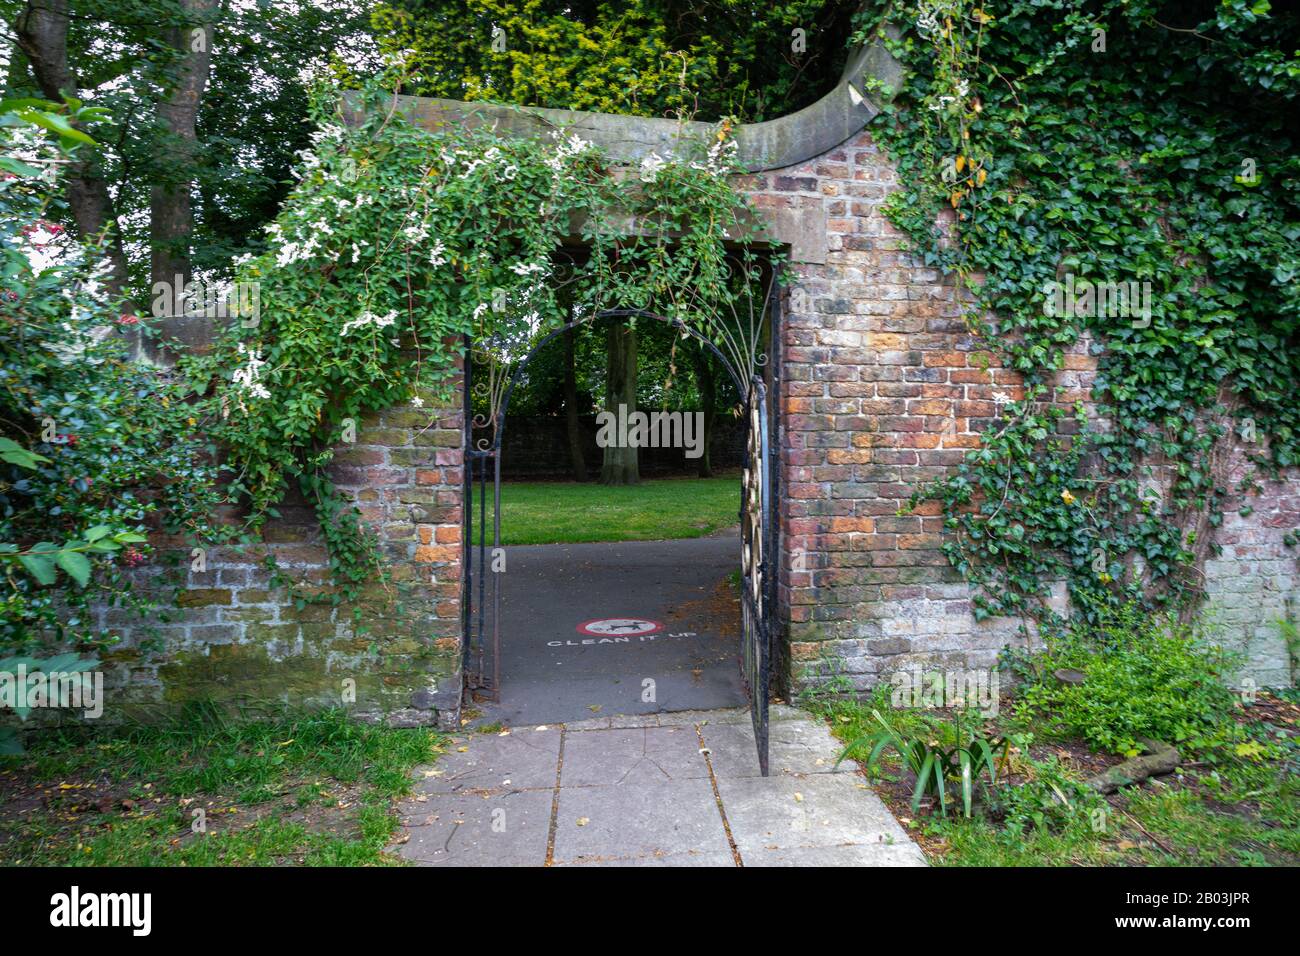 iron gate and brick exit to walled garden in central park wallasey wirral july 2019 Stock Photo